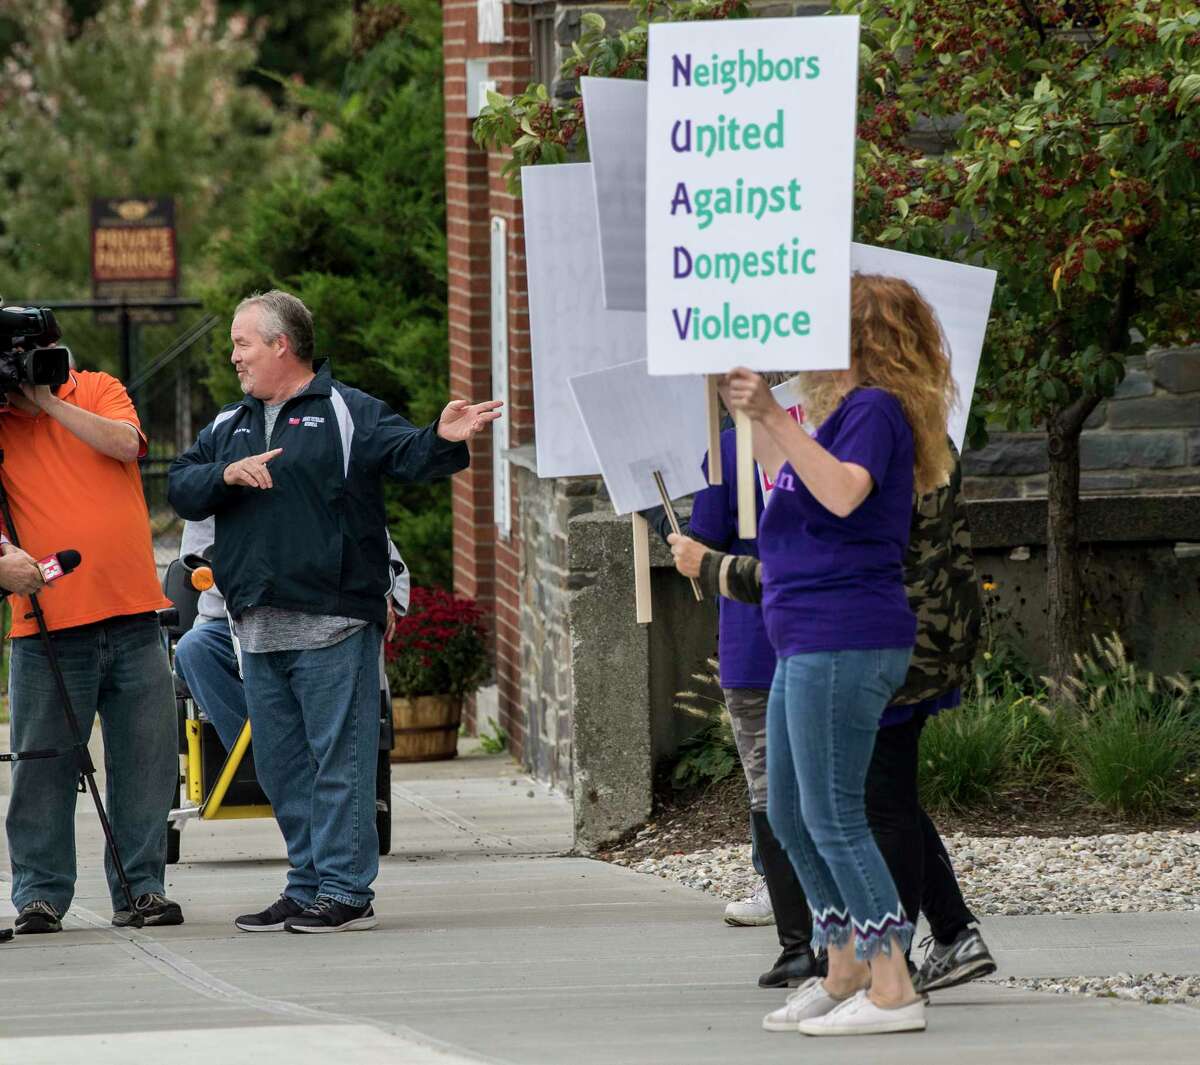 Cohoes Mayor Shawn Morse, left, addresses protestors against domestic violence as they voice their feelings in front of Cohoes City Hall Thursday Oct.4, 2018 in Cohoes, N.Y. (Skip Dickstein/Times Union)